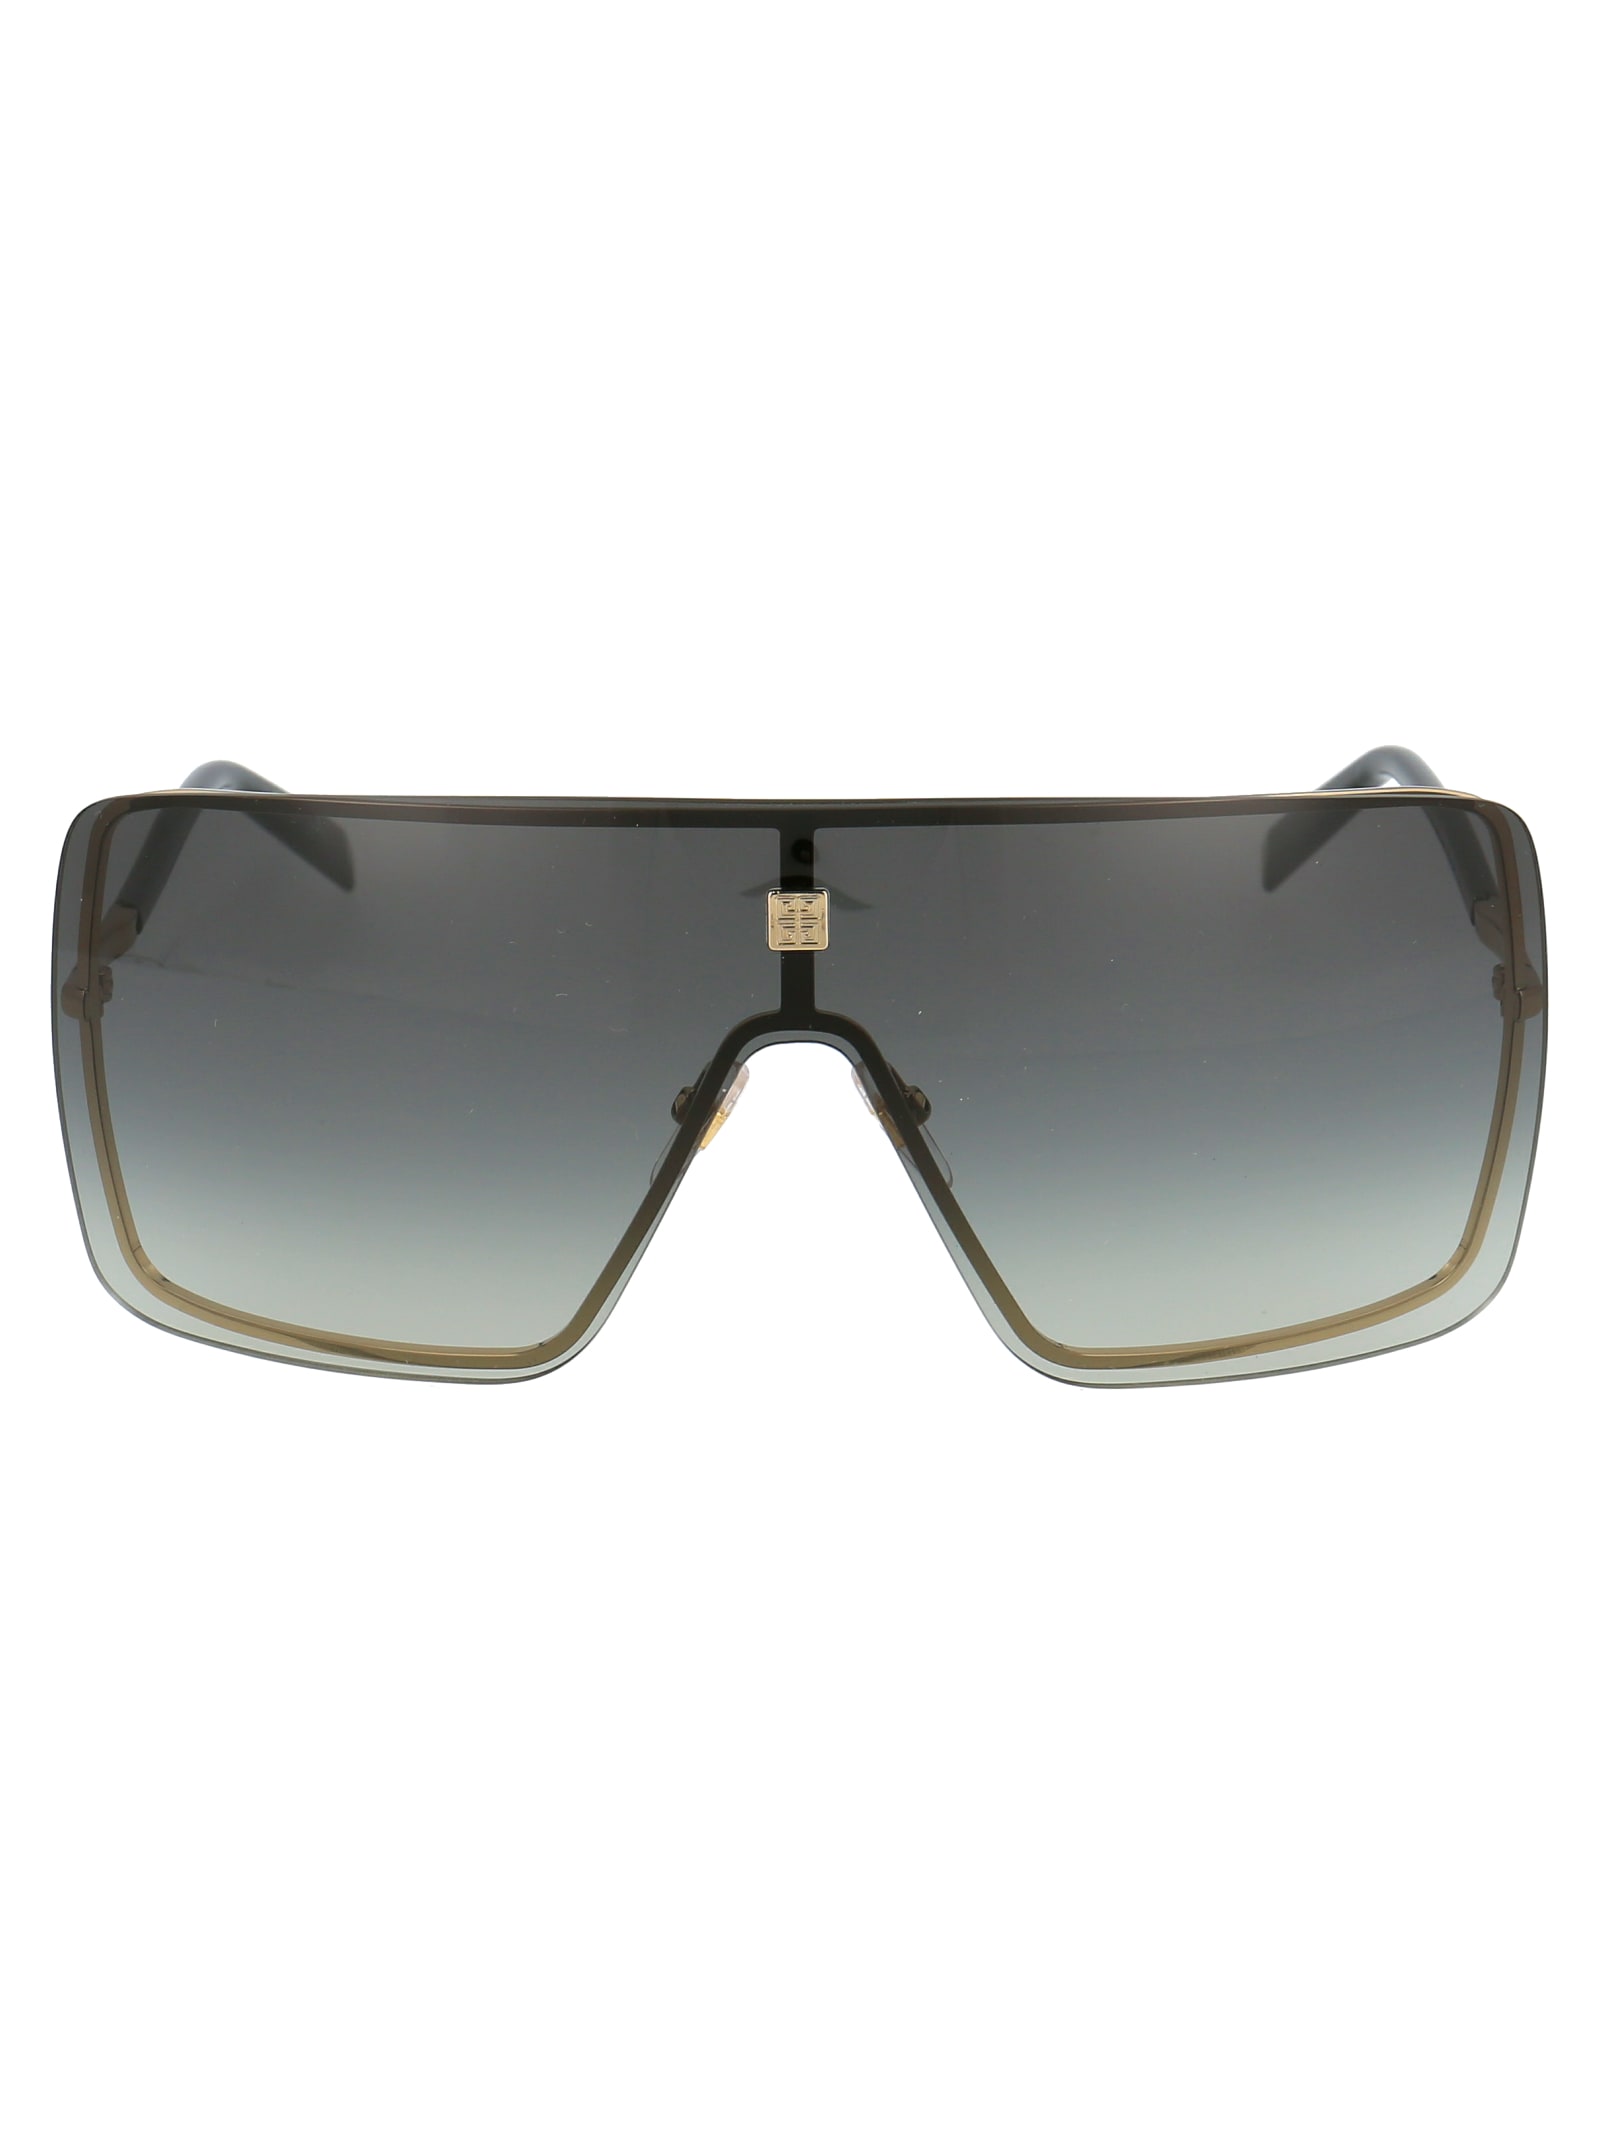 Givenchy Sunglasses In Gold Grey